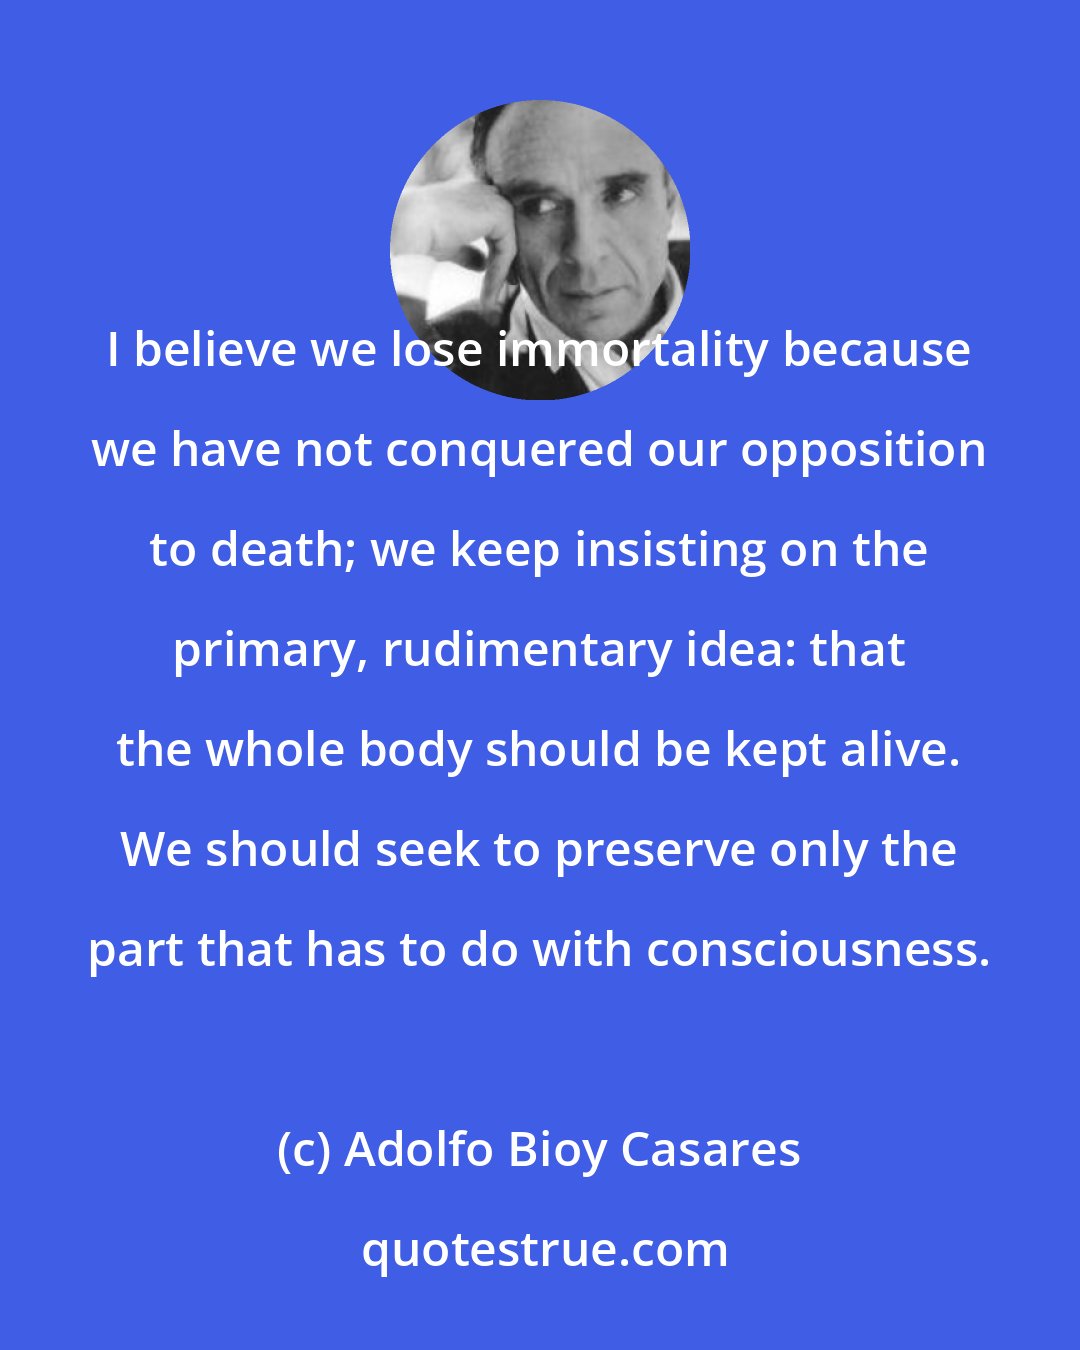 Adolfo Bioy Casares: I believe we lose immortality because we have not conquered our opposition to death; we keep insisting on the primary, rudimentary idea: that the whole body should be kept alive. We should seek to preserve only the part that has to do with consciousness.